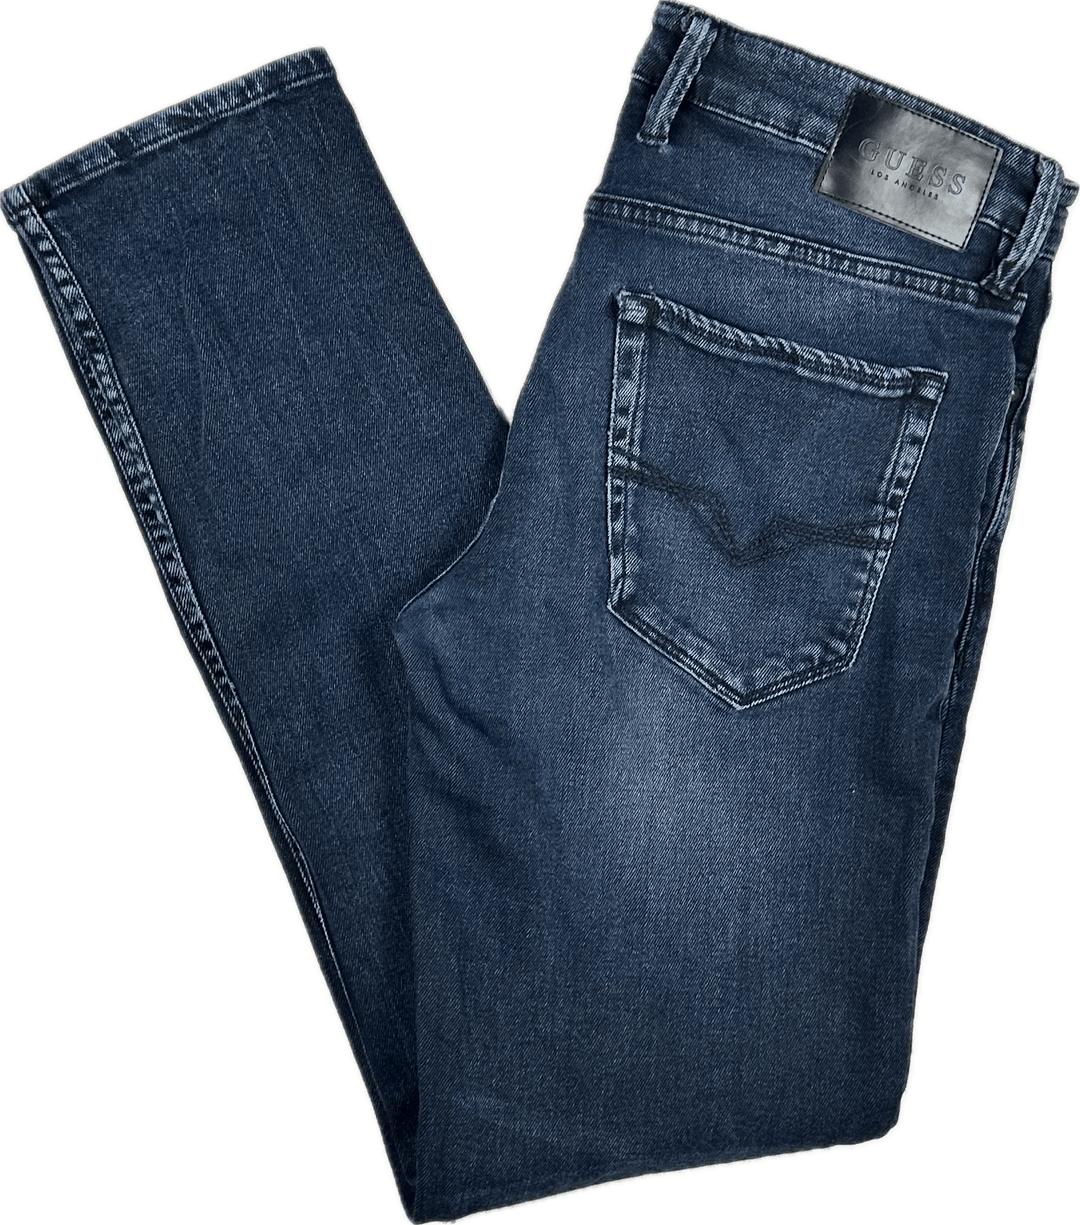 Guess 'Slim Tapered' Mens Jeans - Size 33R - Jean Pool